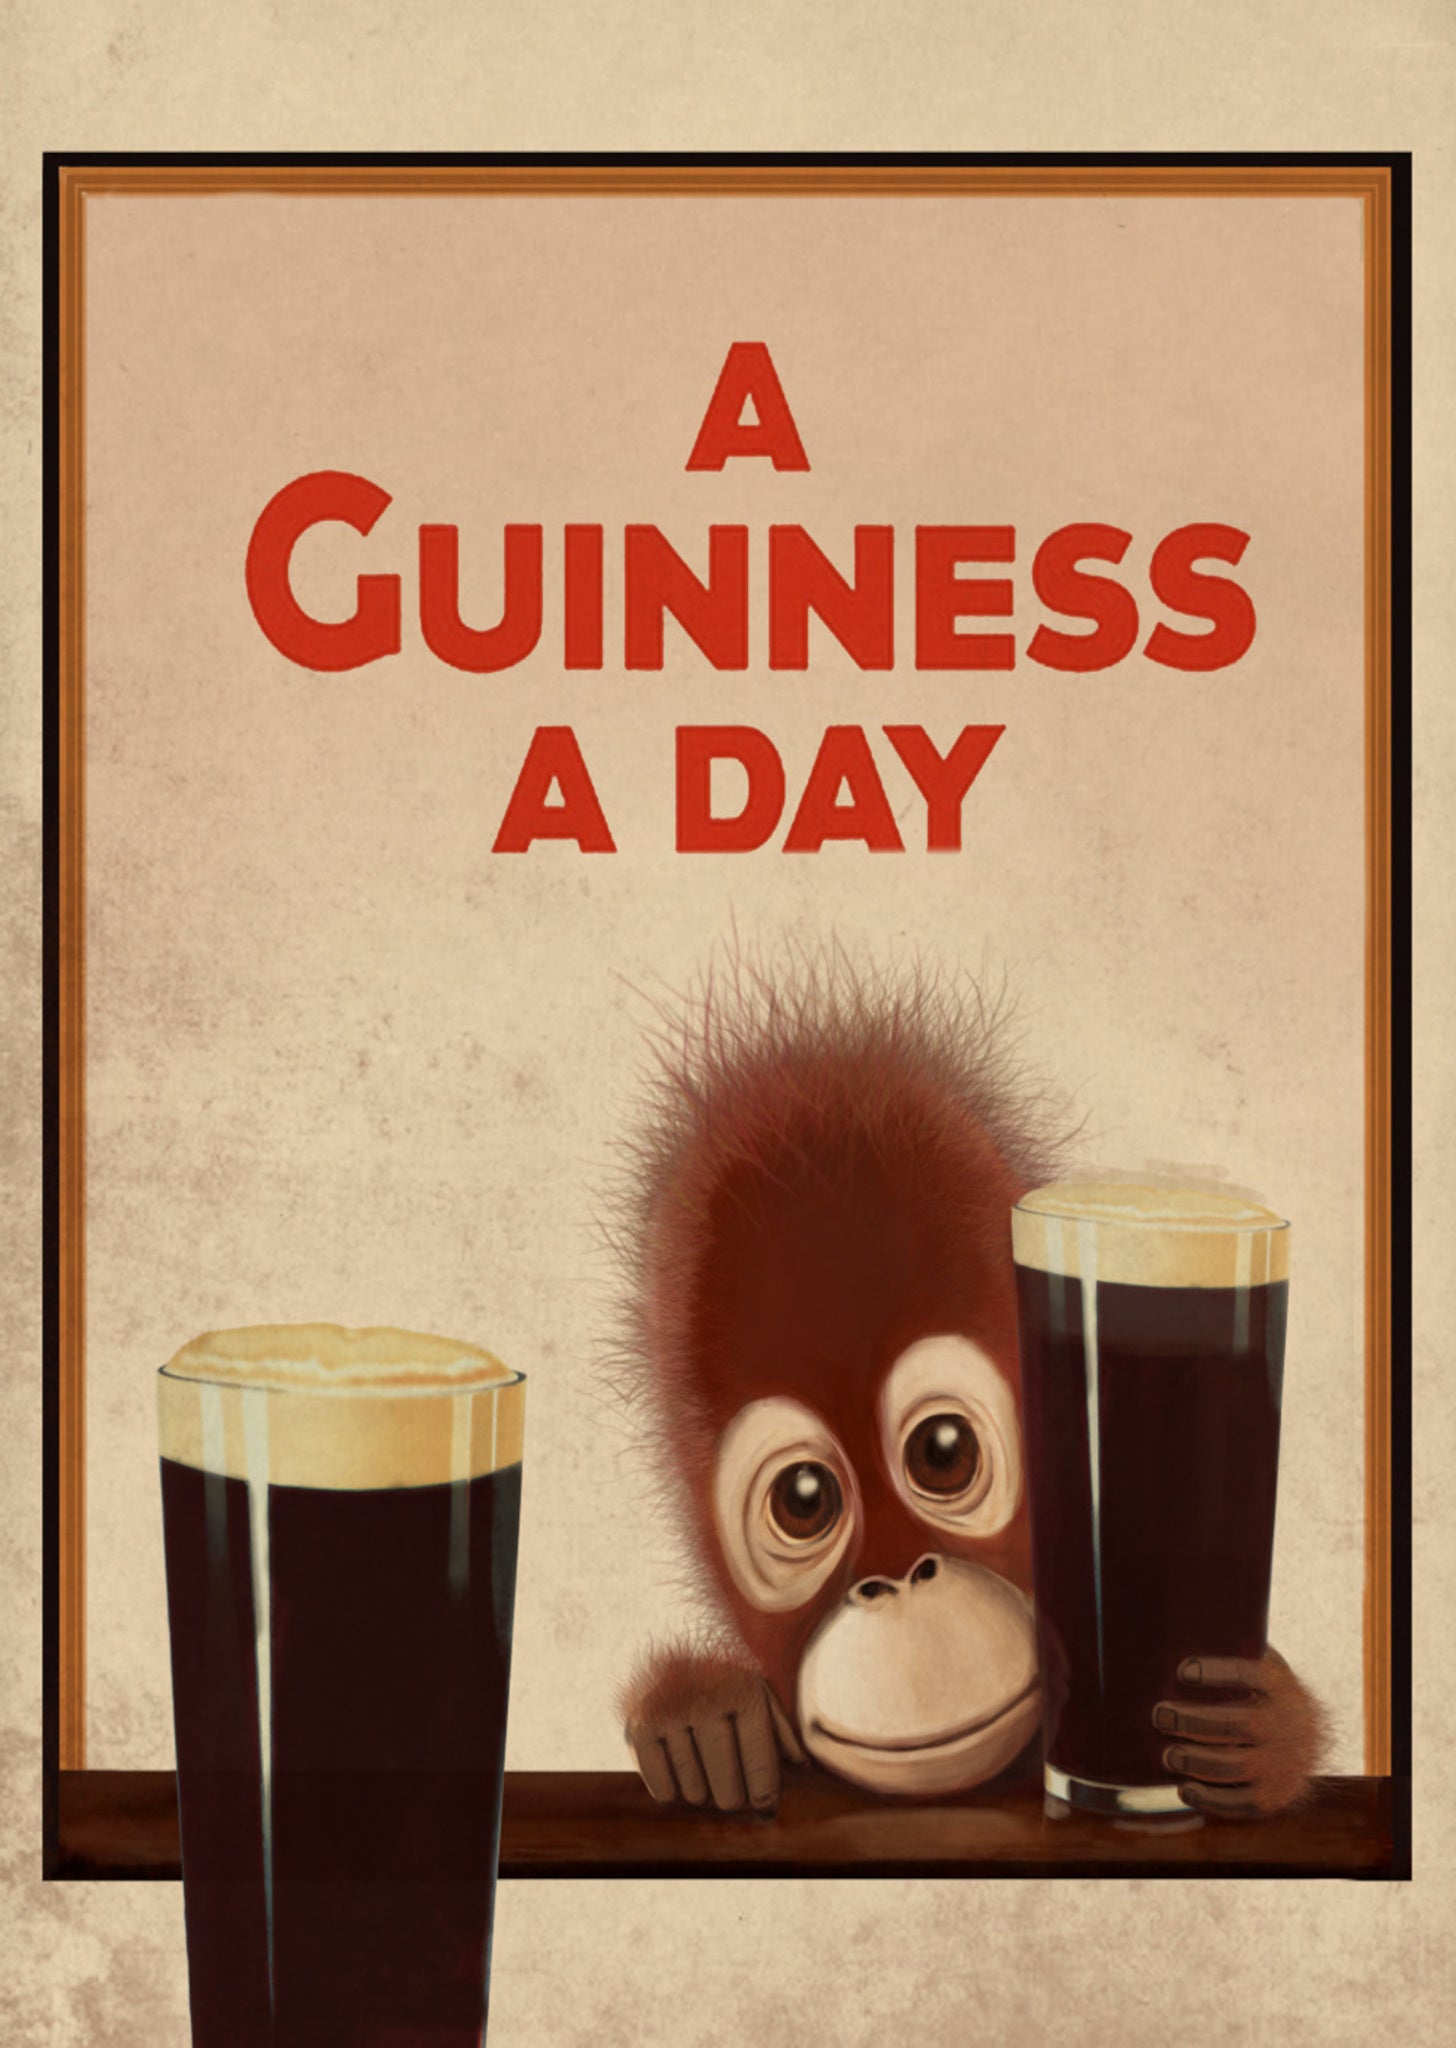 Guinness - A Guinness a Day - A4 Mini Print/Poster